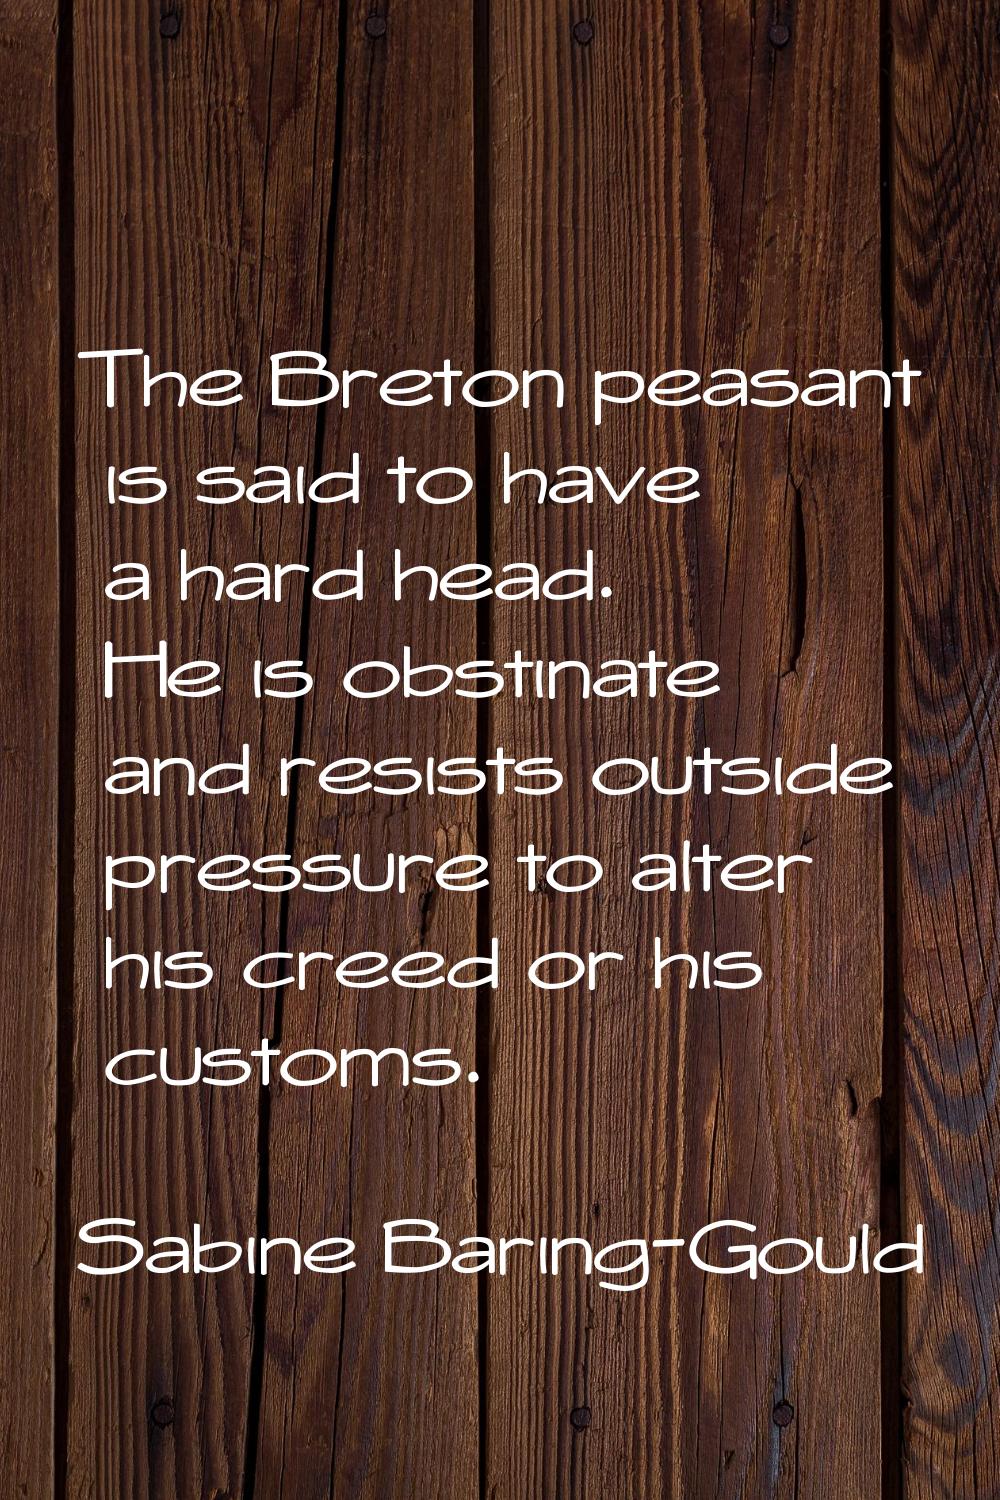 The Breton peasant is said to have a hard head. He is obstinate and resists outside pressure to alt